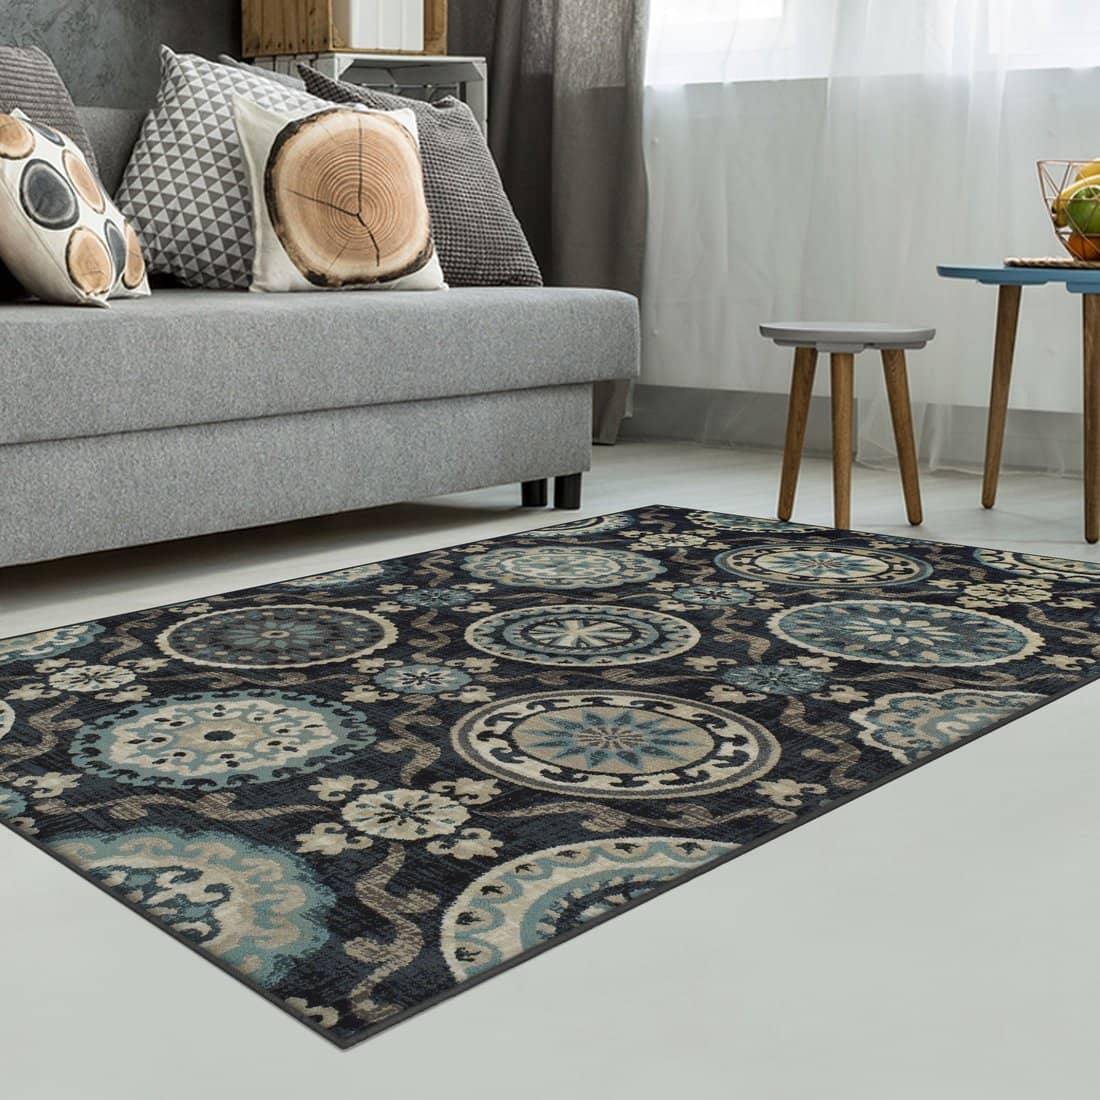 How to Find the Perfect Rug for Every Room in Your Home - Home City Inc